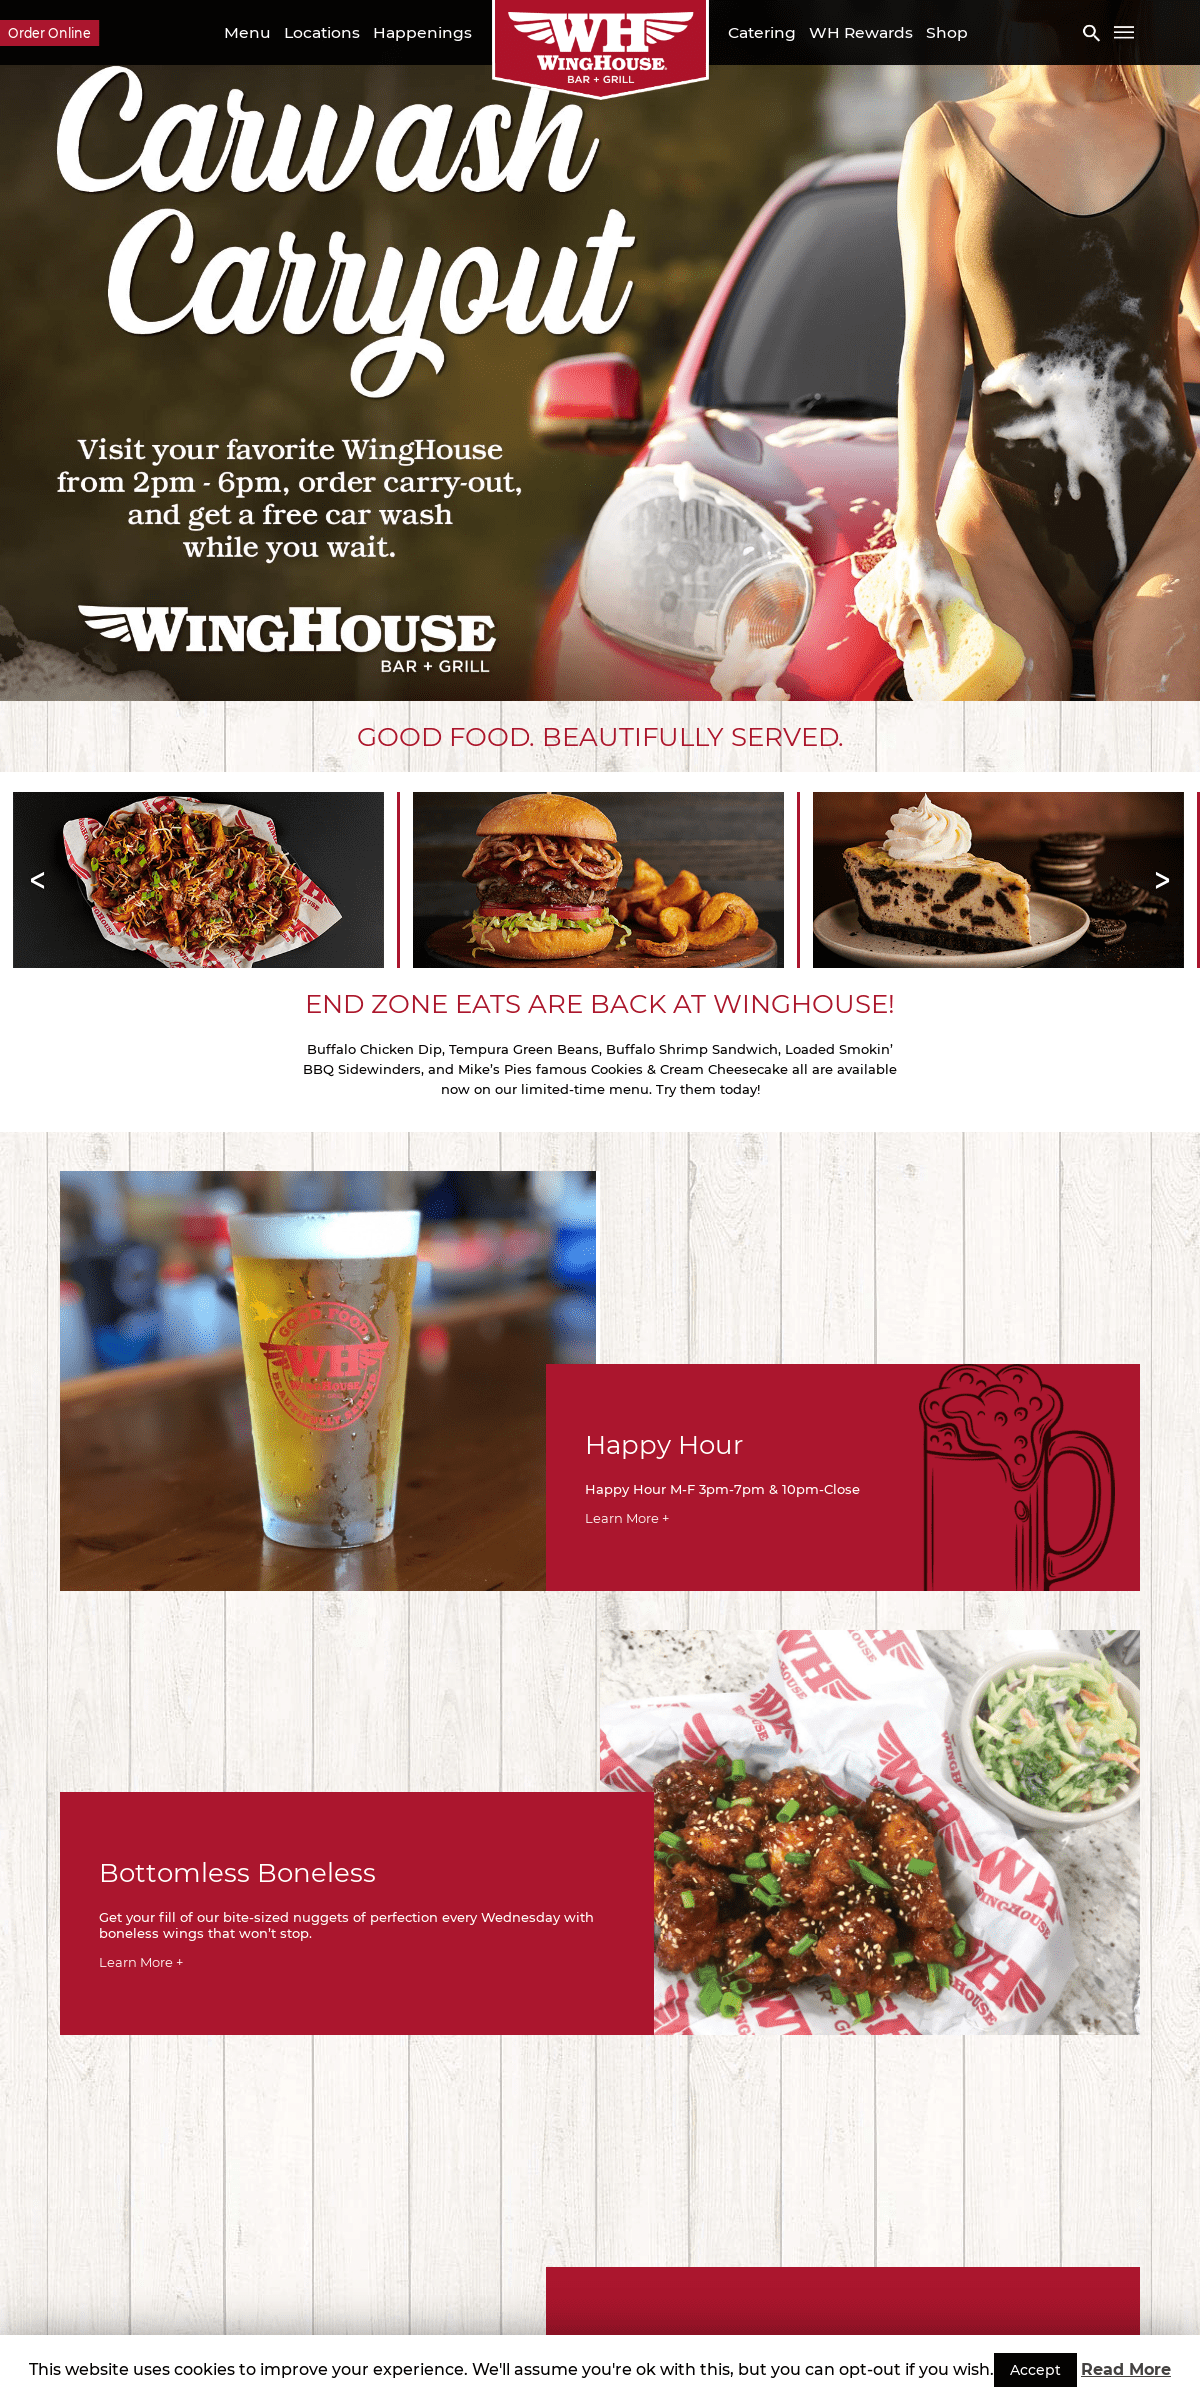 A complete backup of winghouse.com